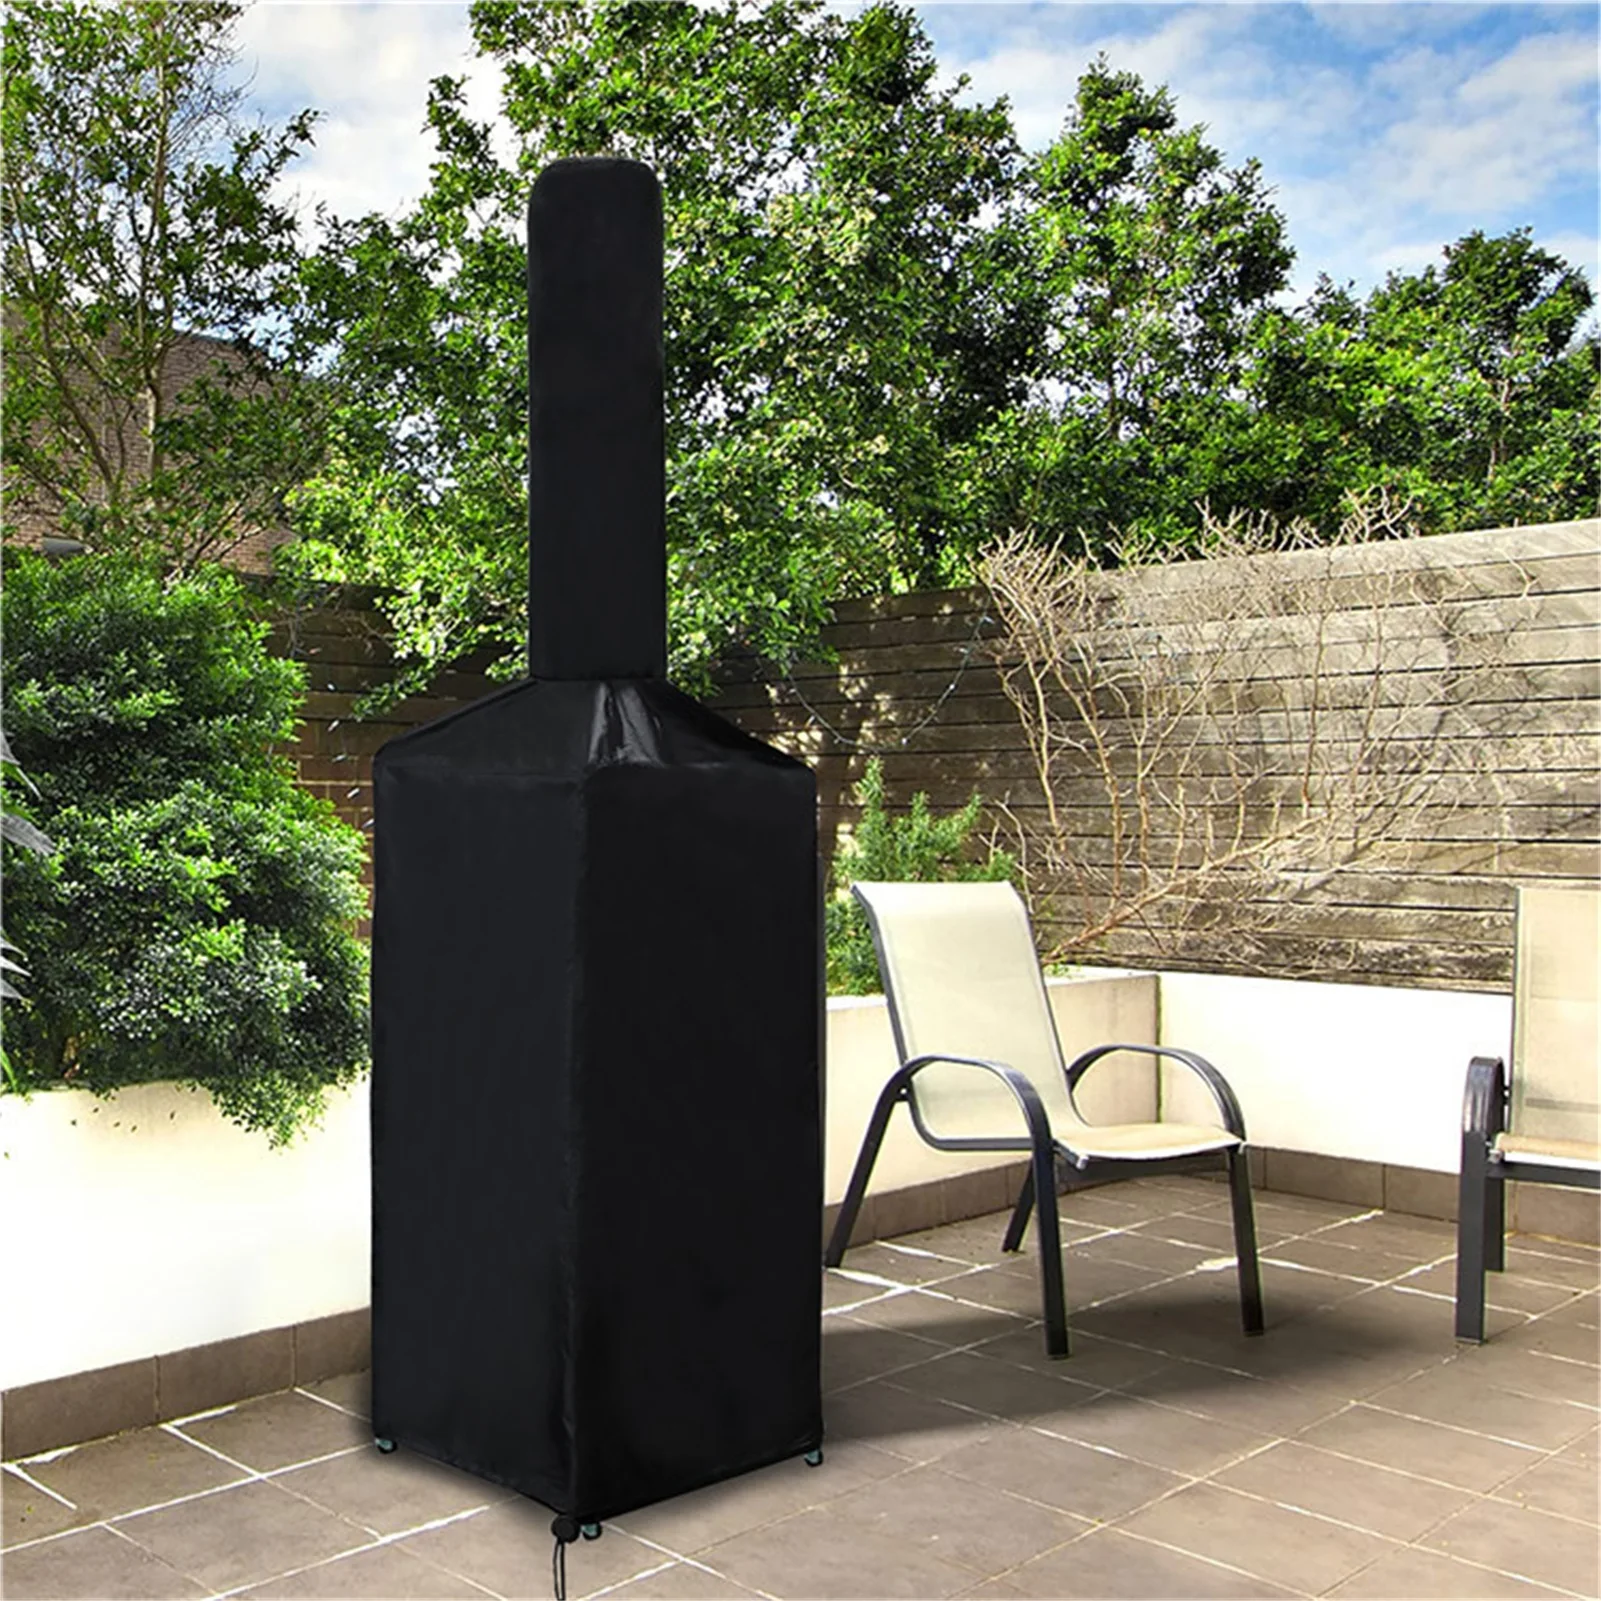 

Pizza Oven Cover Waterproof Dustproof Pizza Oven Protection Black Weather Resistant Dustproof Pizza Oven BBQ Rain Cover